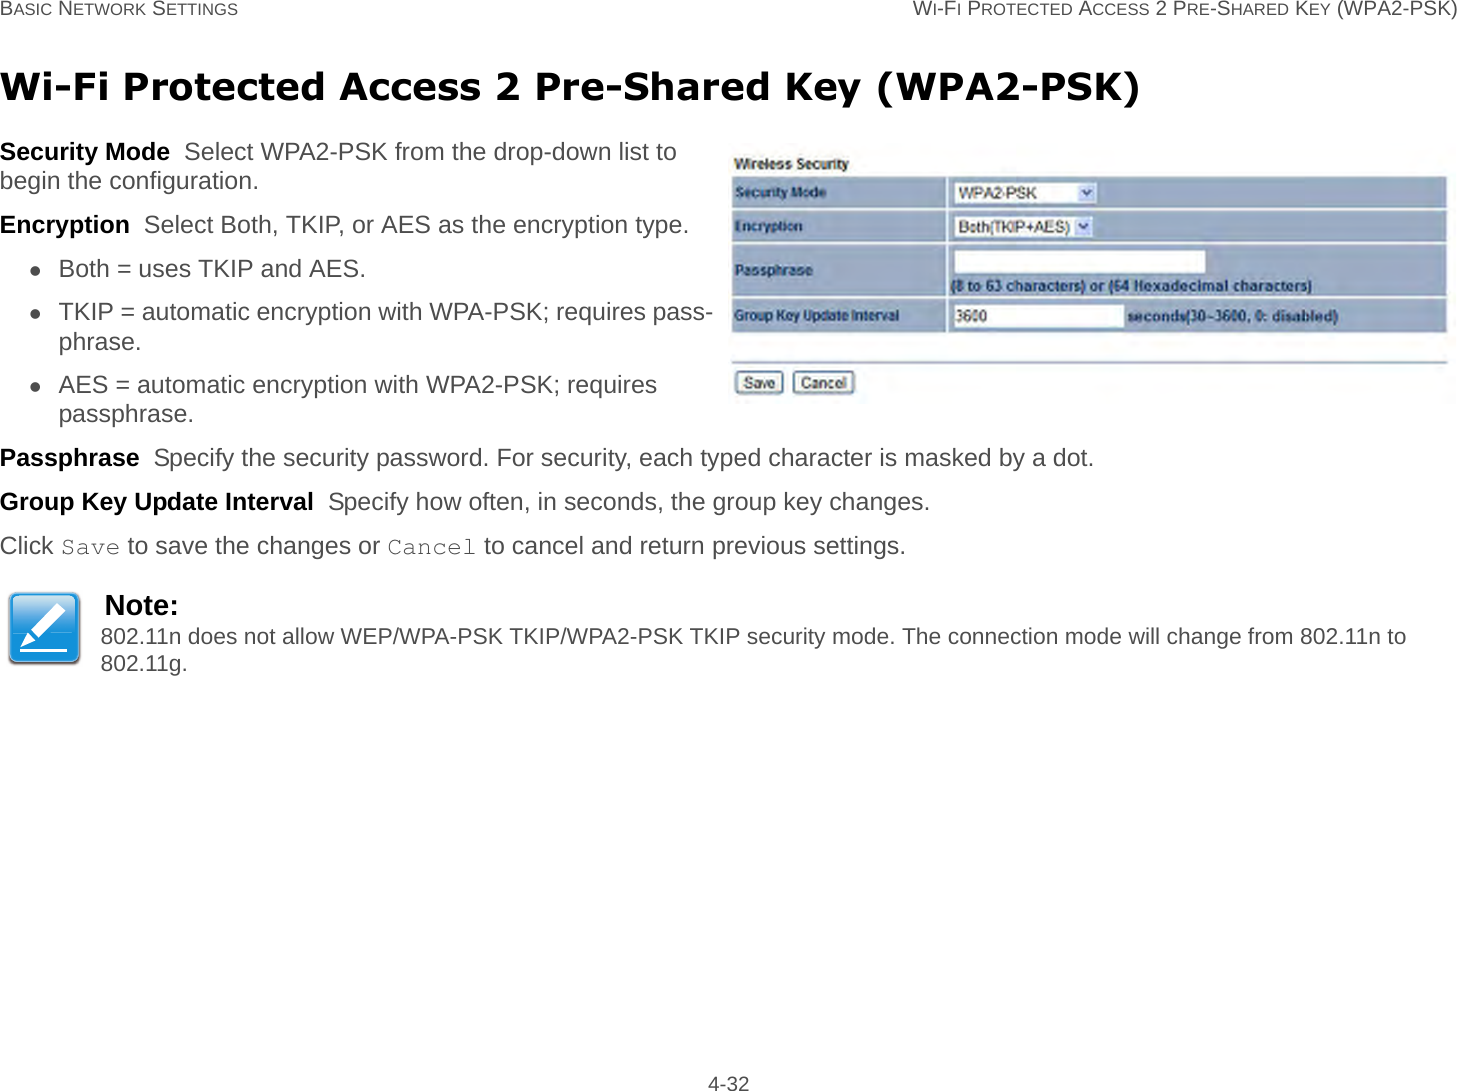 BASIC NETWORK SETTINGS WI-FI PROTECTED ACCESS 2 PRE-SHARED KEY (WPA2-PSK) 4-32Wi-Fi Protected Access 2 Pre-Shared Key (WPA2-PSK)Security Mode  Select WPA2-PSK from the drop-down list to begin the configuration.Encryption  Select Both, TKIP, or AES as the encryption type.Both = uses TKIP and AES.TKIP = automatic encryption with WPA-PSK; requires pass-phrase.AES = automatic encryption with WPA2-PSK; requires passphrase.Passphrase  Specify the security password. For security, each typed character is masked by a dot.Group Key Update Interval  Specify how often, in seconds, the group key changes.Click Save to save the changes or Cancel to cancel and return previous settings.Note:802.11n does not allow WEP/WPA-PSK TKIP/WPA2-PSK TKIP security mode. The connection mode will change from 802.11n to 802.11g.